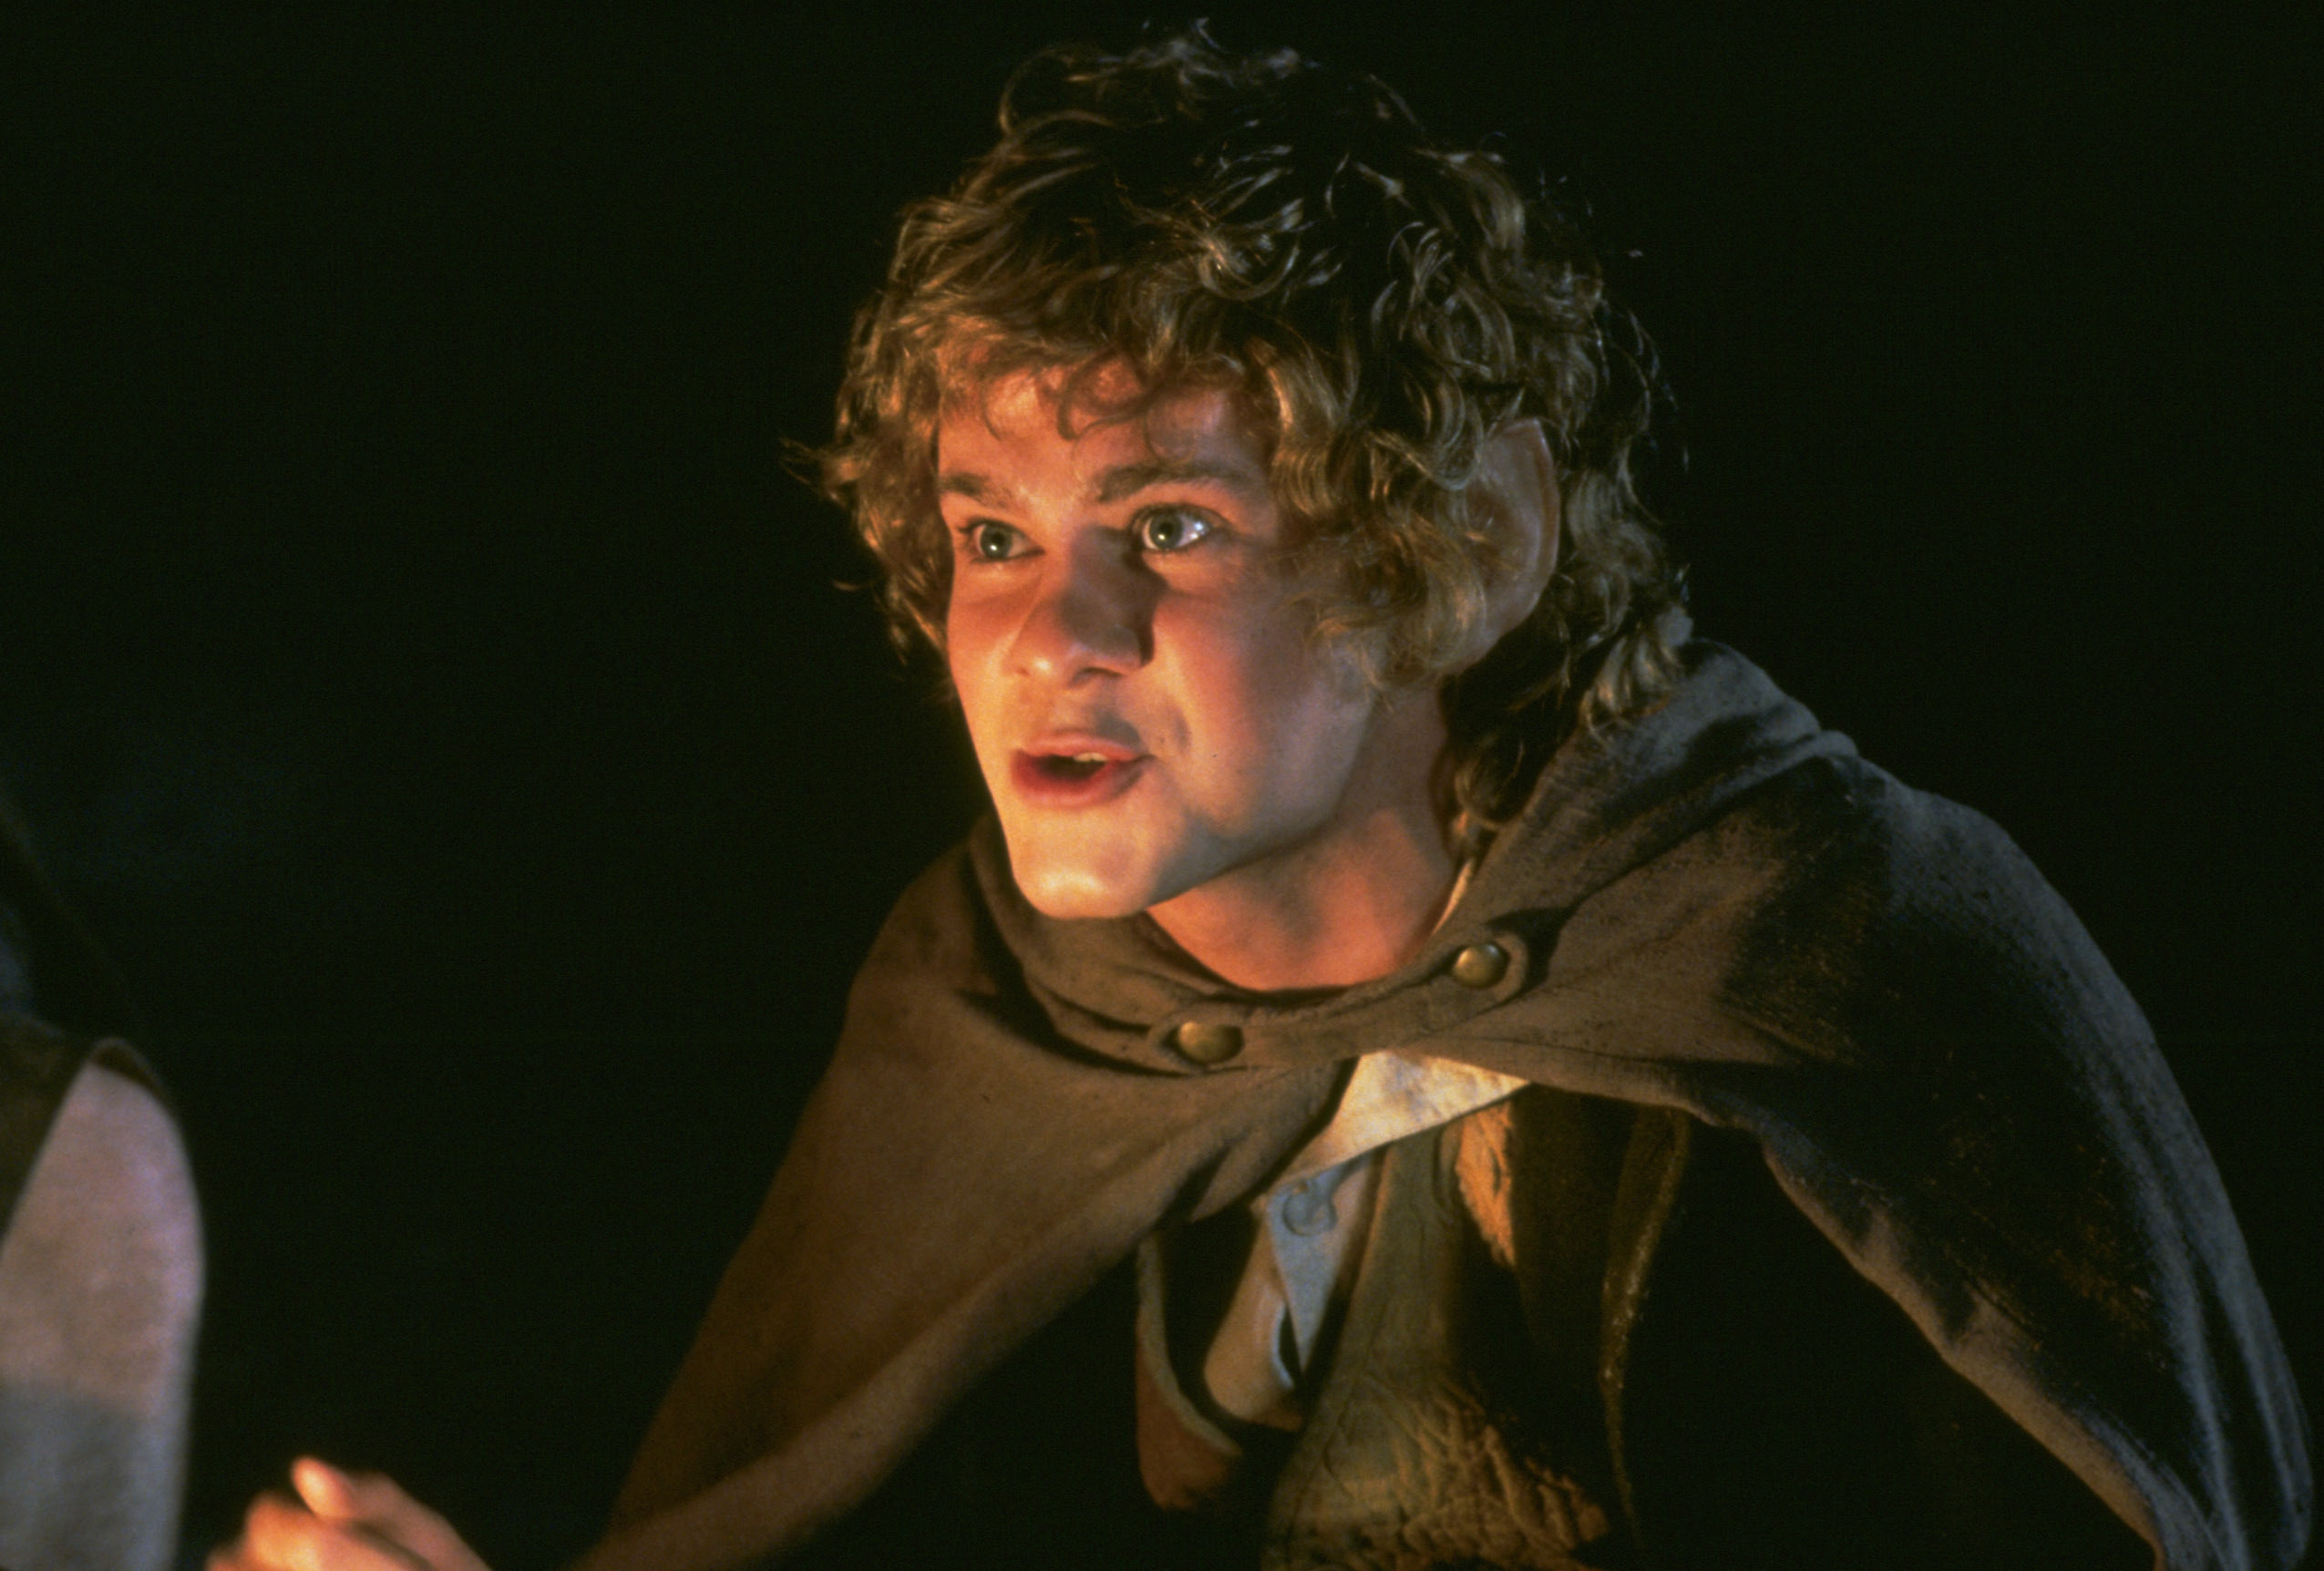 Dominic Monaghan in The Lord of the Rings: The Fellowship of the Ring